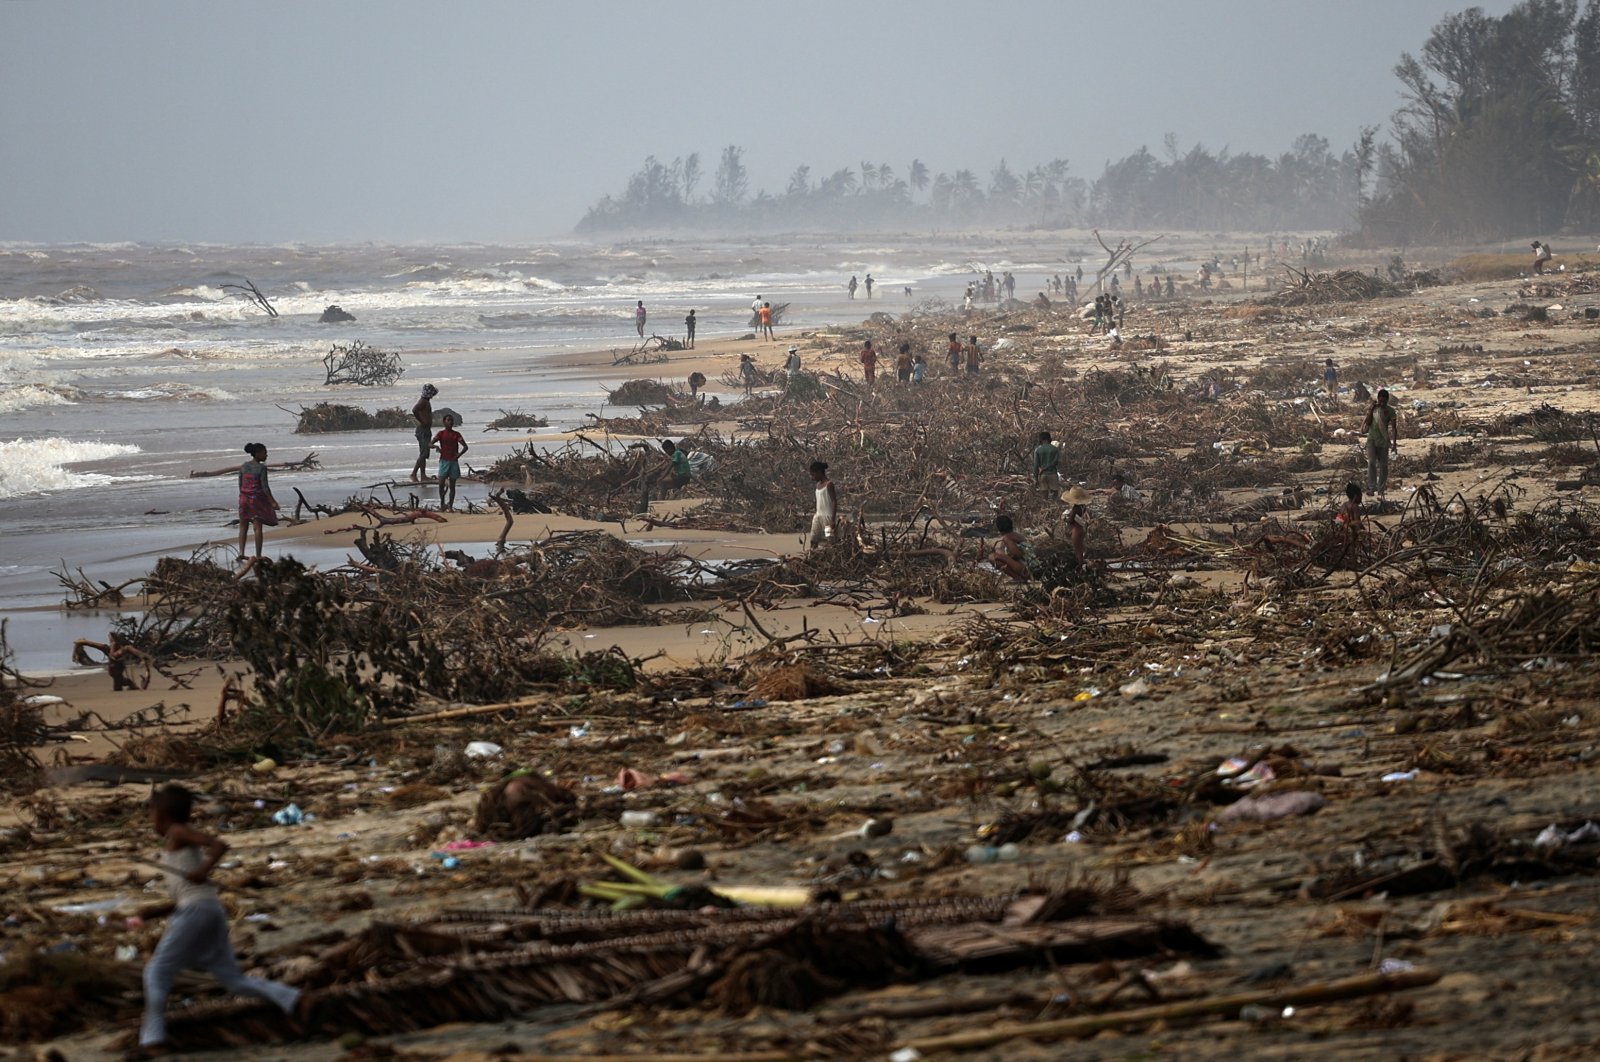 People search debris on the beach, in the aftermath of Cyclone Batsirai, in the town of Mananjary, Madagascar, Feb. 8, 2022. (Reuters Photo)